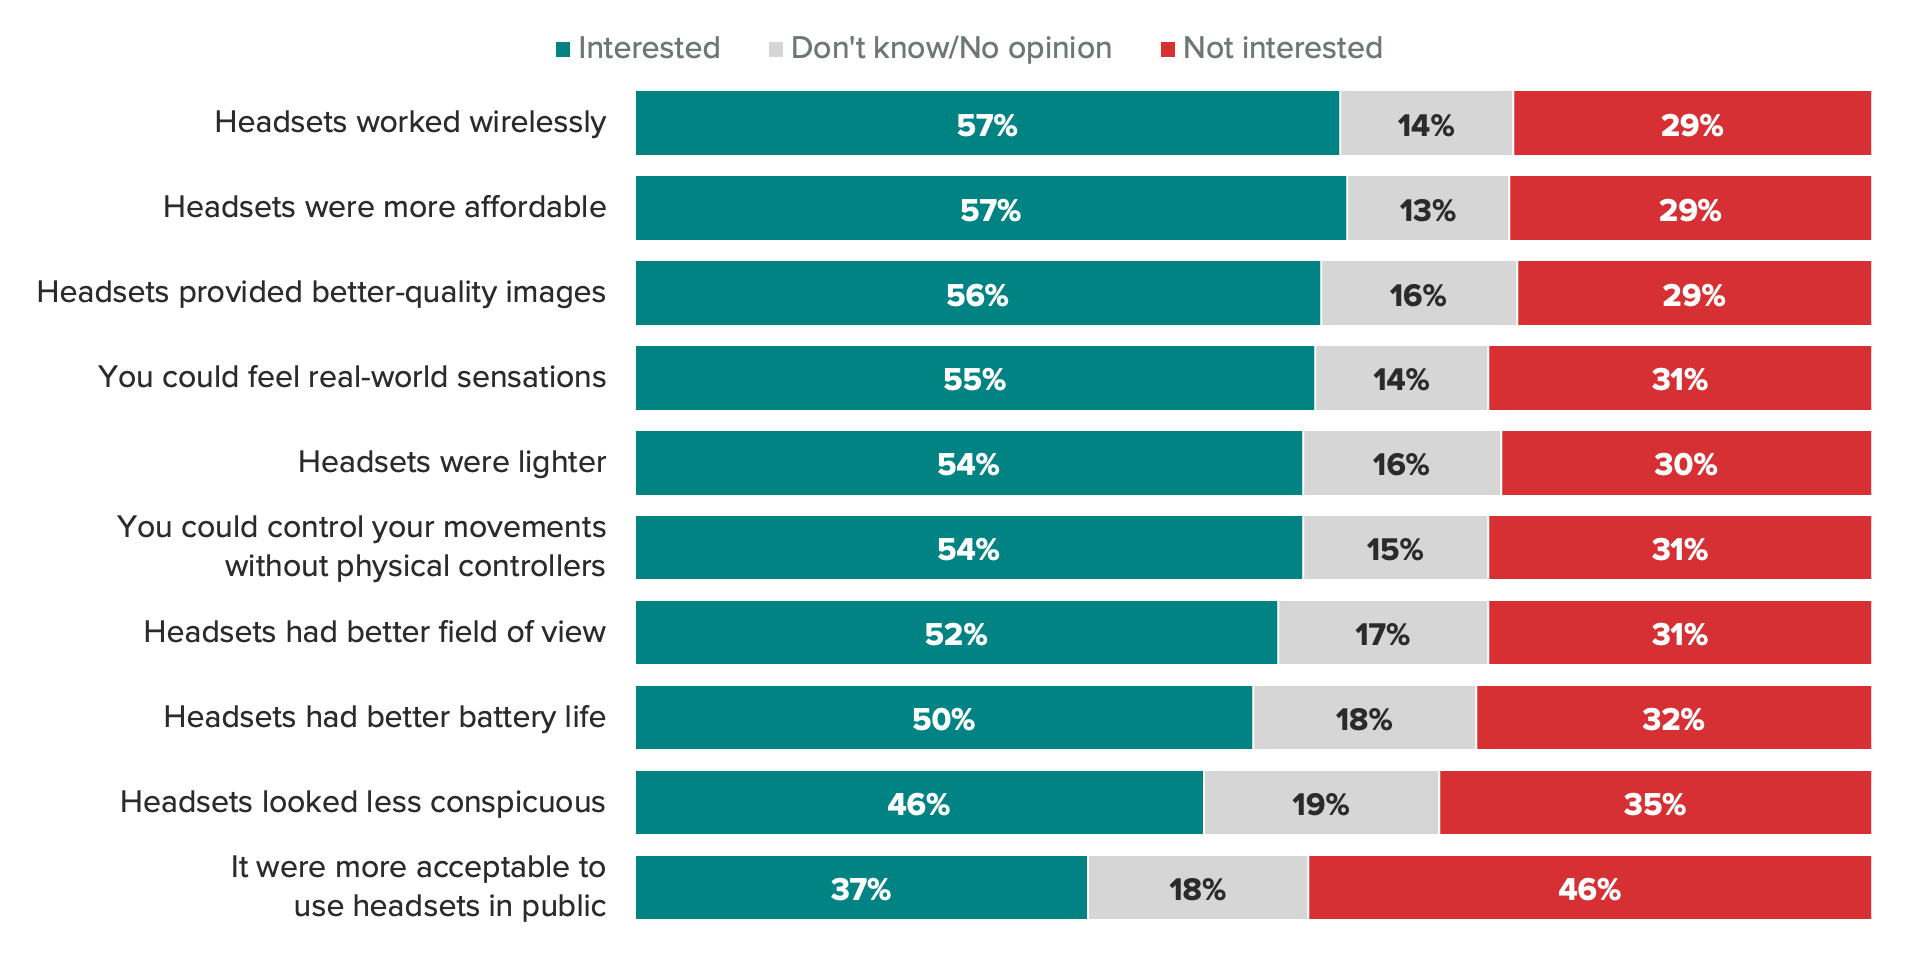 Bar chart measuring interest in virtual reality with different conditions, showing affordability, wireless connectivity and image quality topped the list of VR hardware features that would spur additional interest among consumers.